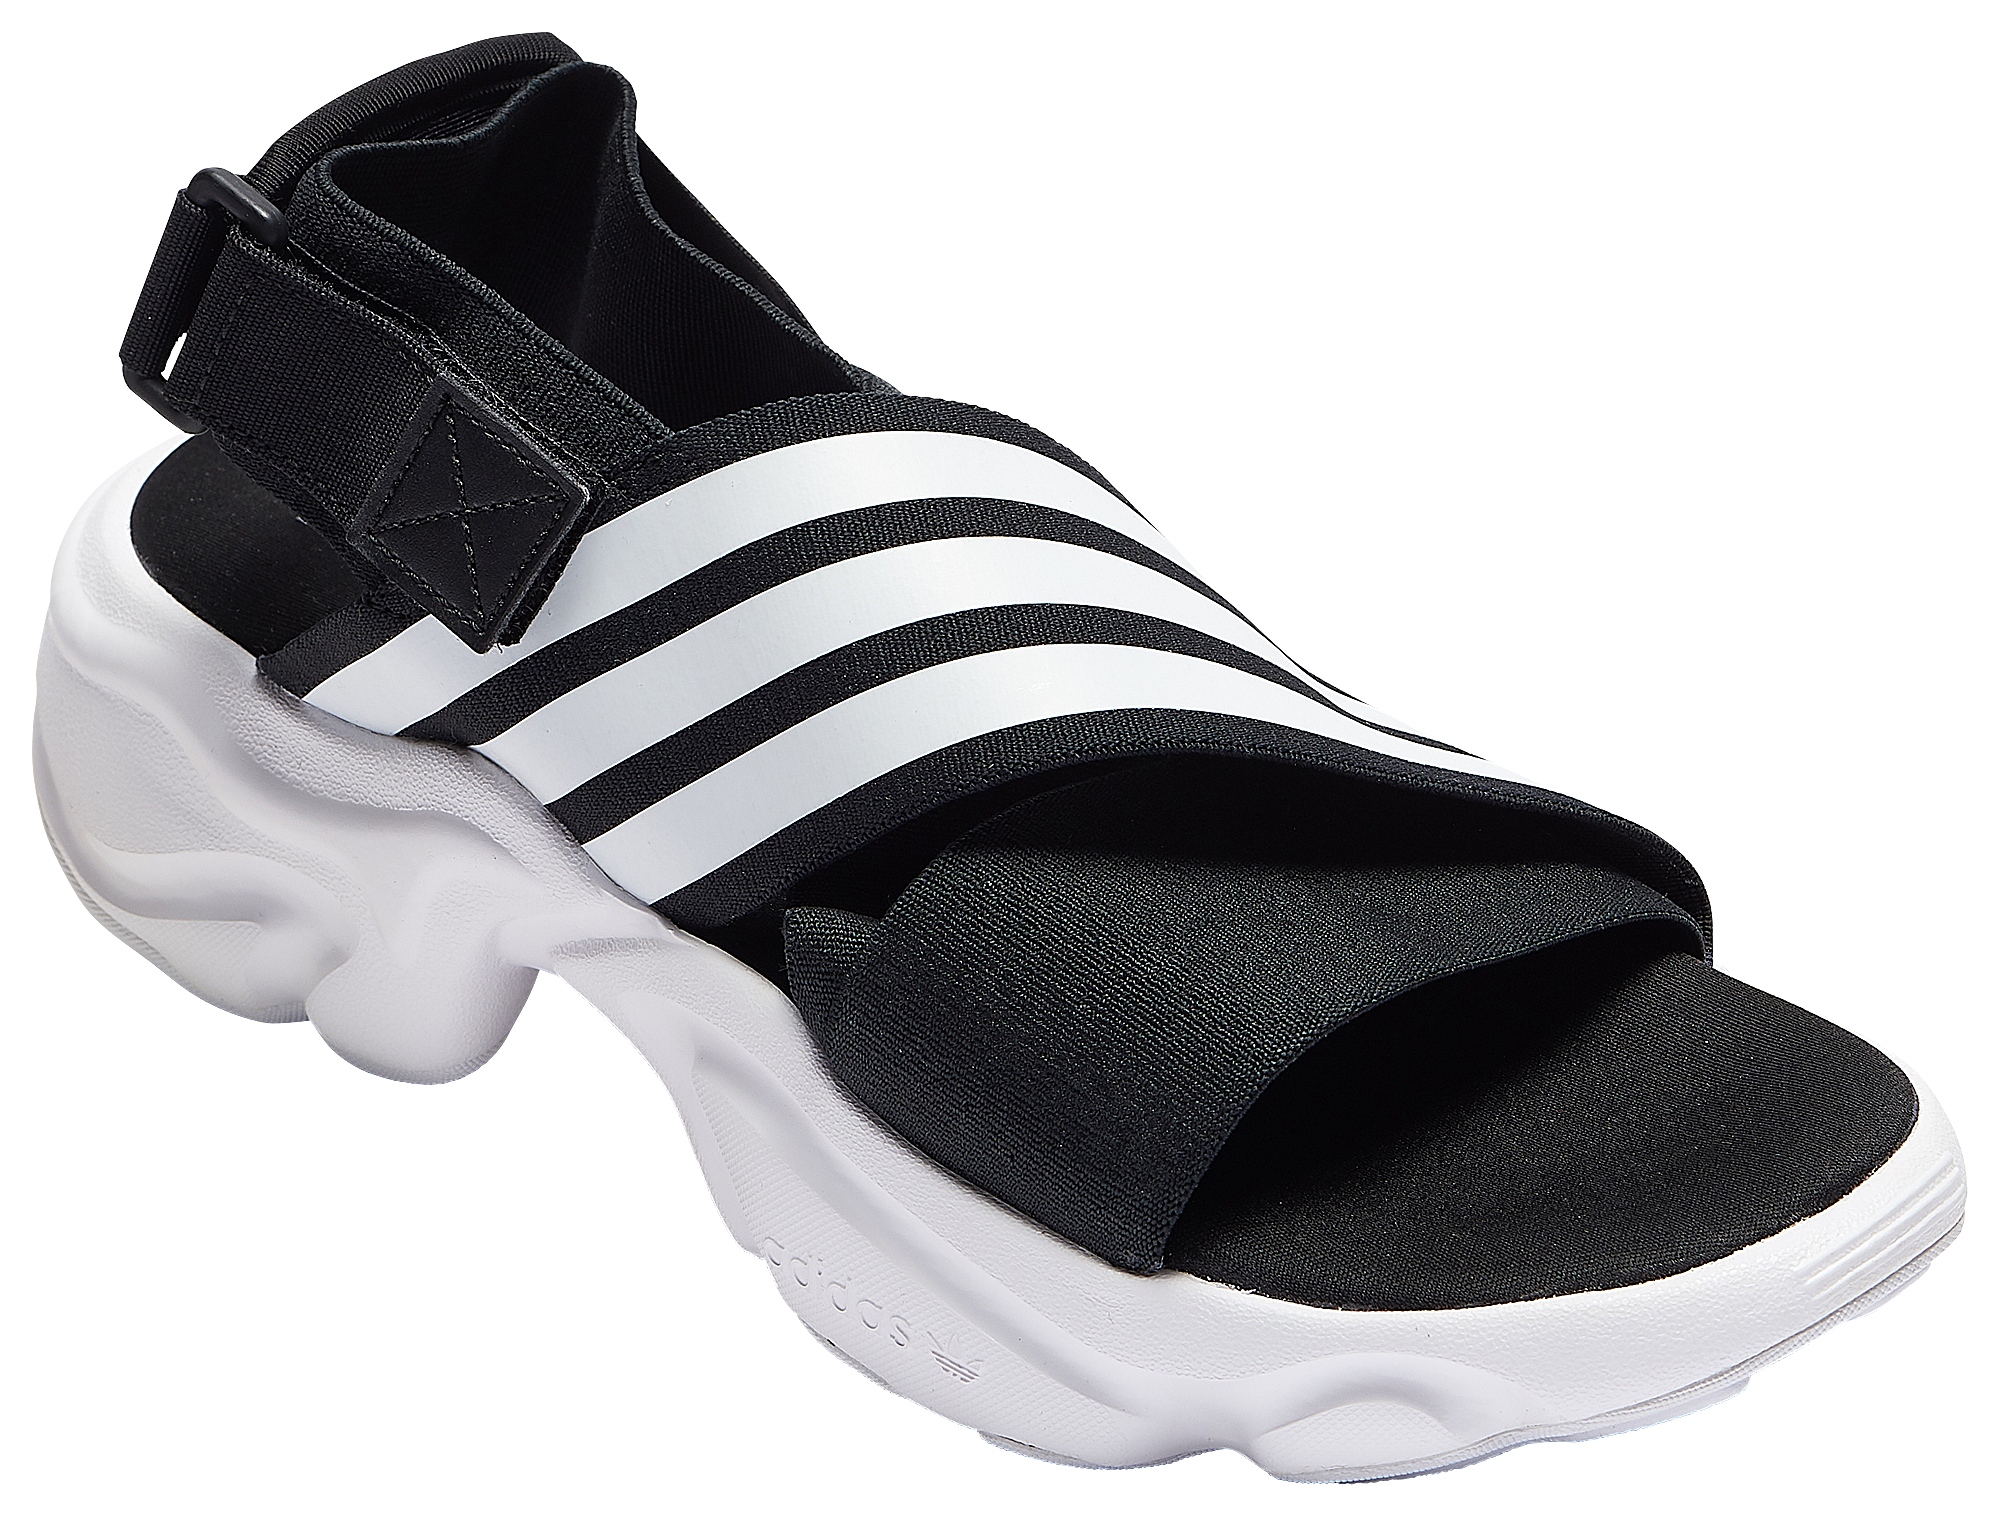 adidas sandals for women price